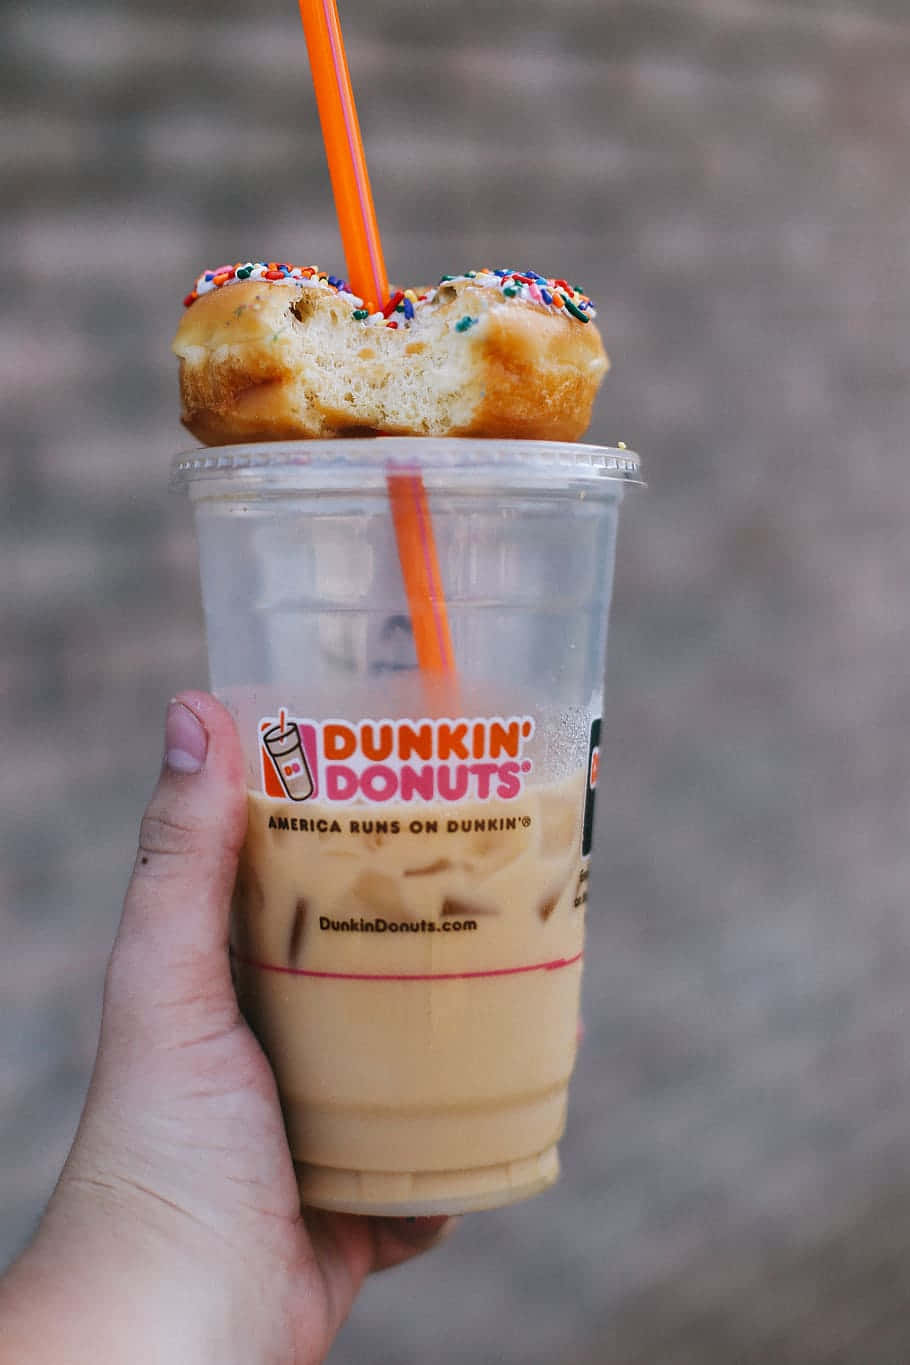 Enjoy a delicious latte from Dunkin' Donuts